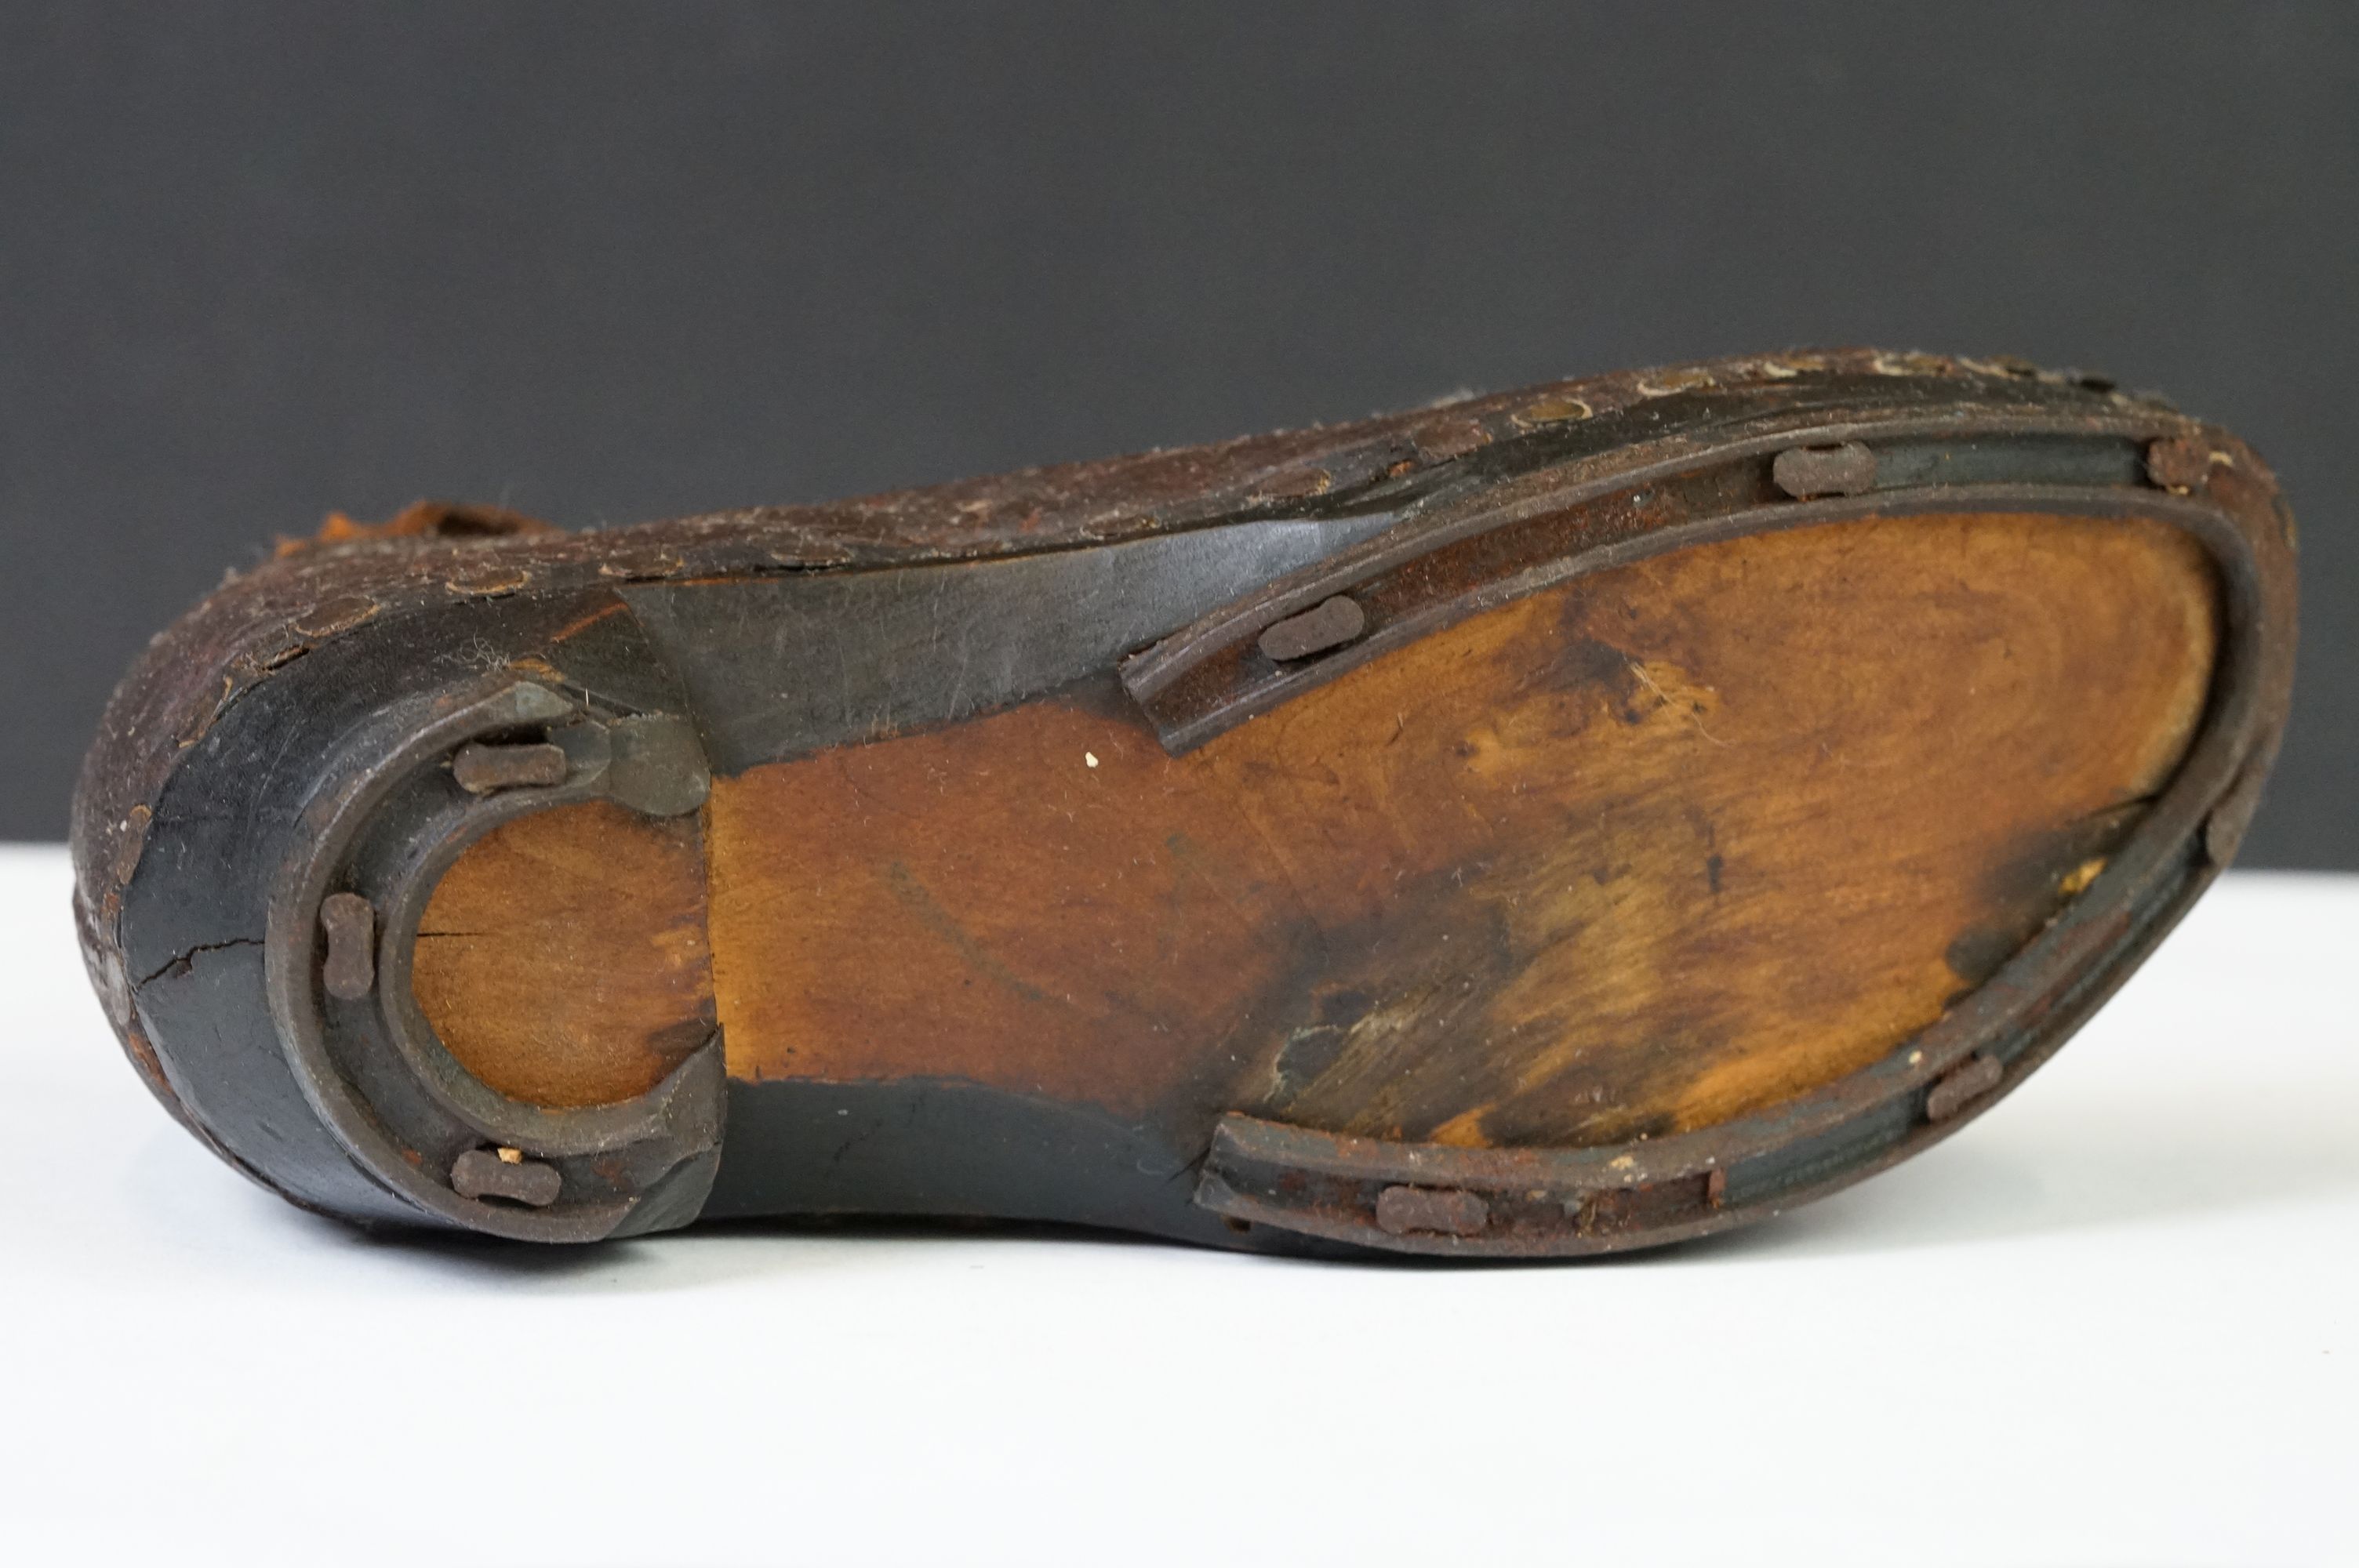 A pair of 'Latchet' leather Childs shoes c.1650-1700 - Image 10 of 10